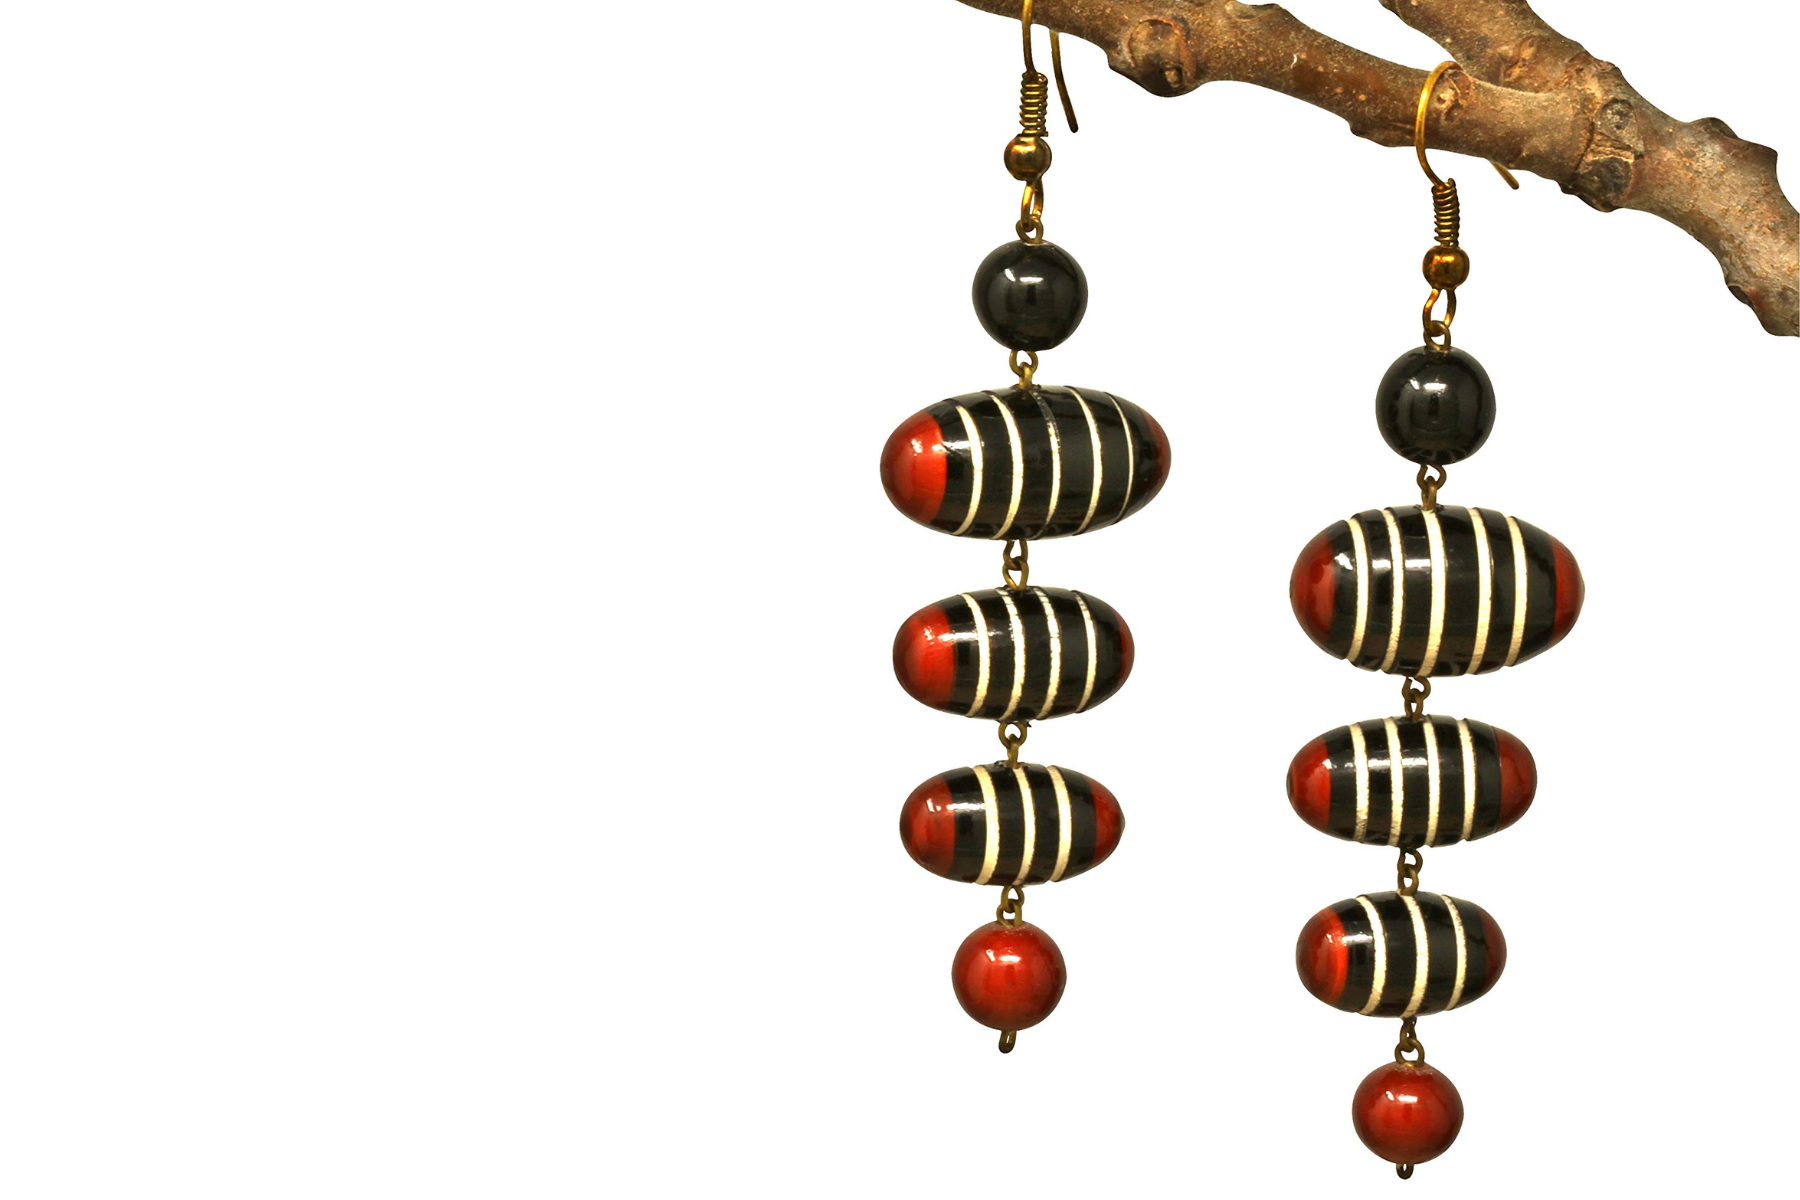 A pair of dangling earrings dangle from a tree part